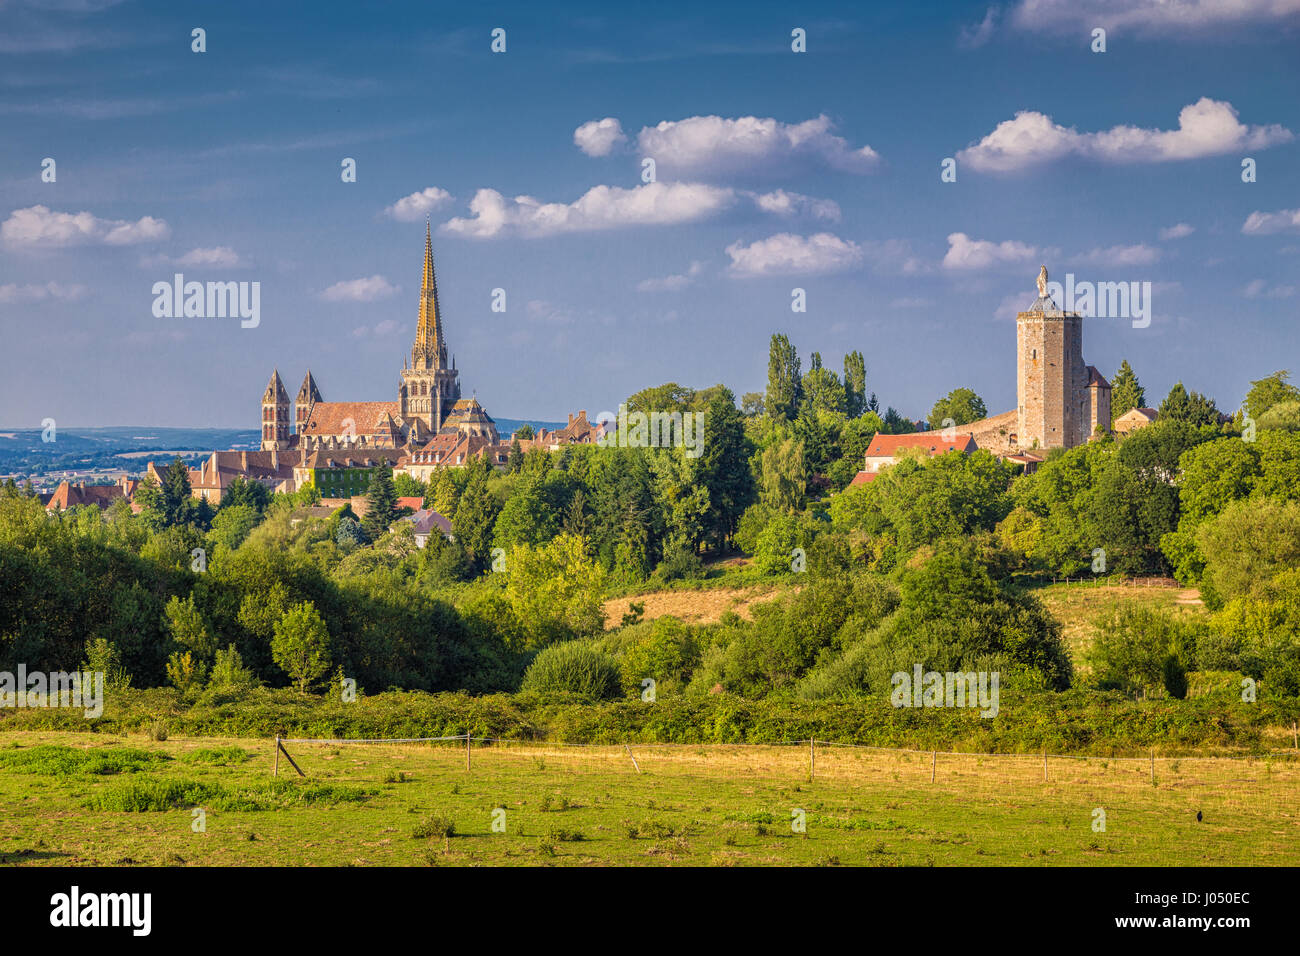 Historic town of Autun with famous Cathedrale Saint-Lazare d'Autun on top of a hill in evening light at sunset, Saone-et-Loire, Burgundy, France Stock Photo